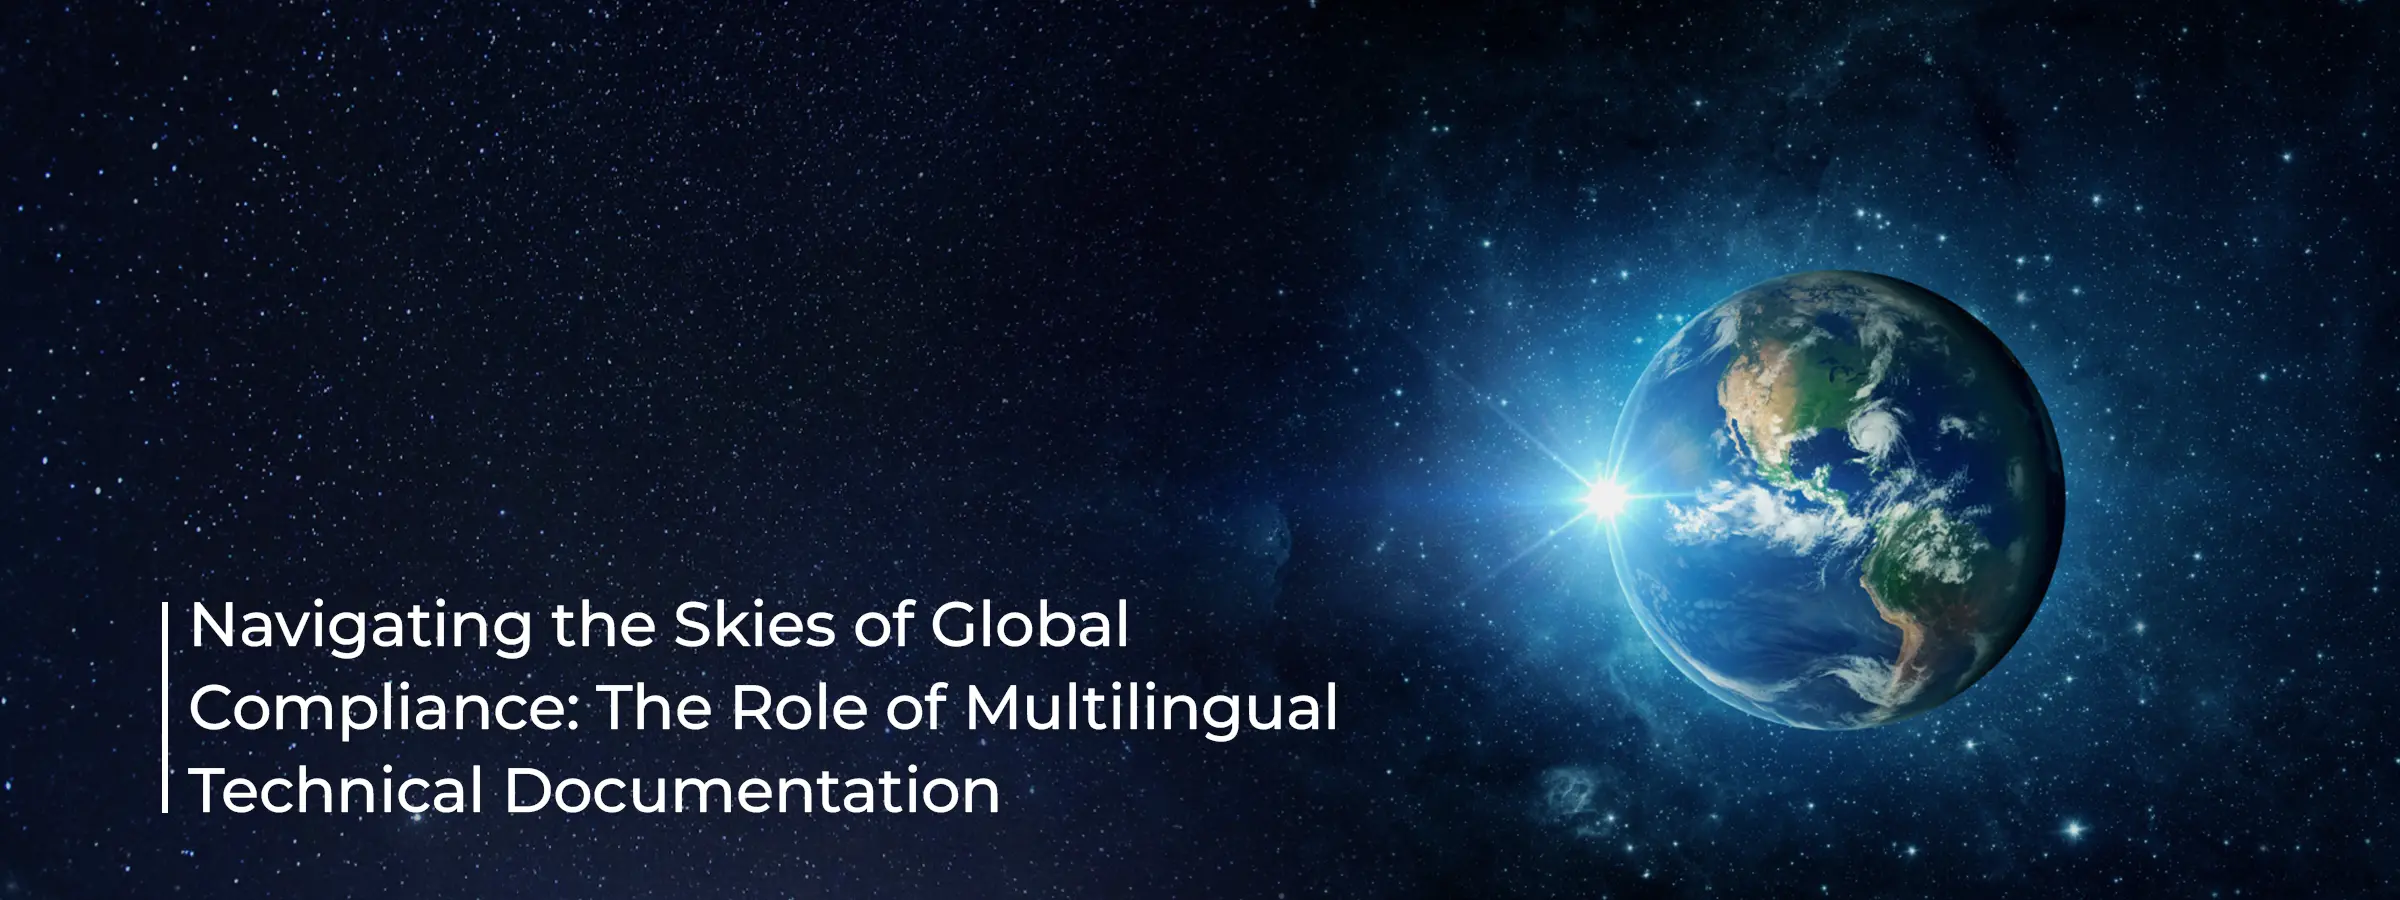 navigating-the-skies-of-global-compliance-the-role-of-multilingual-technical-documentation